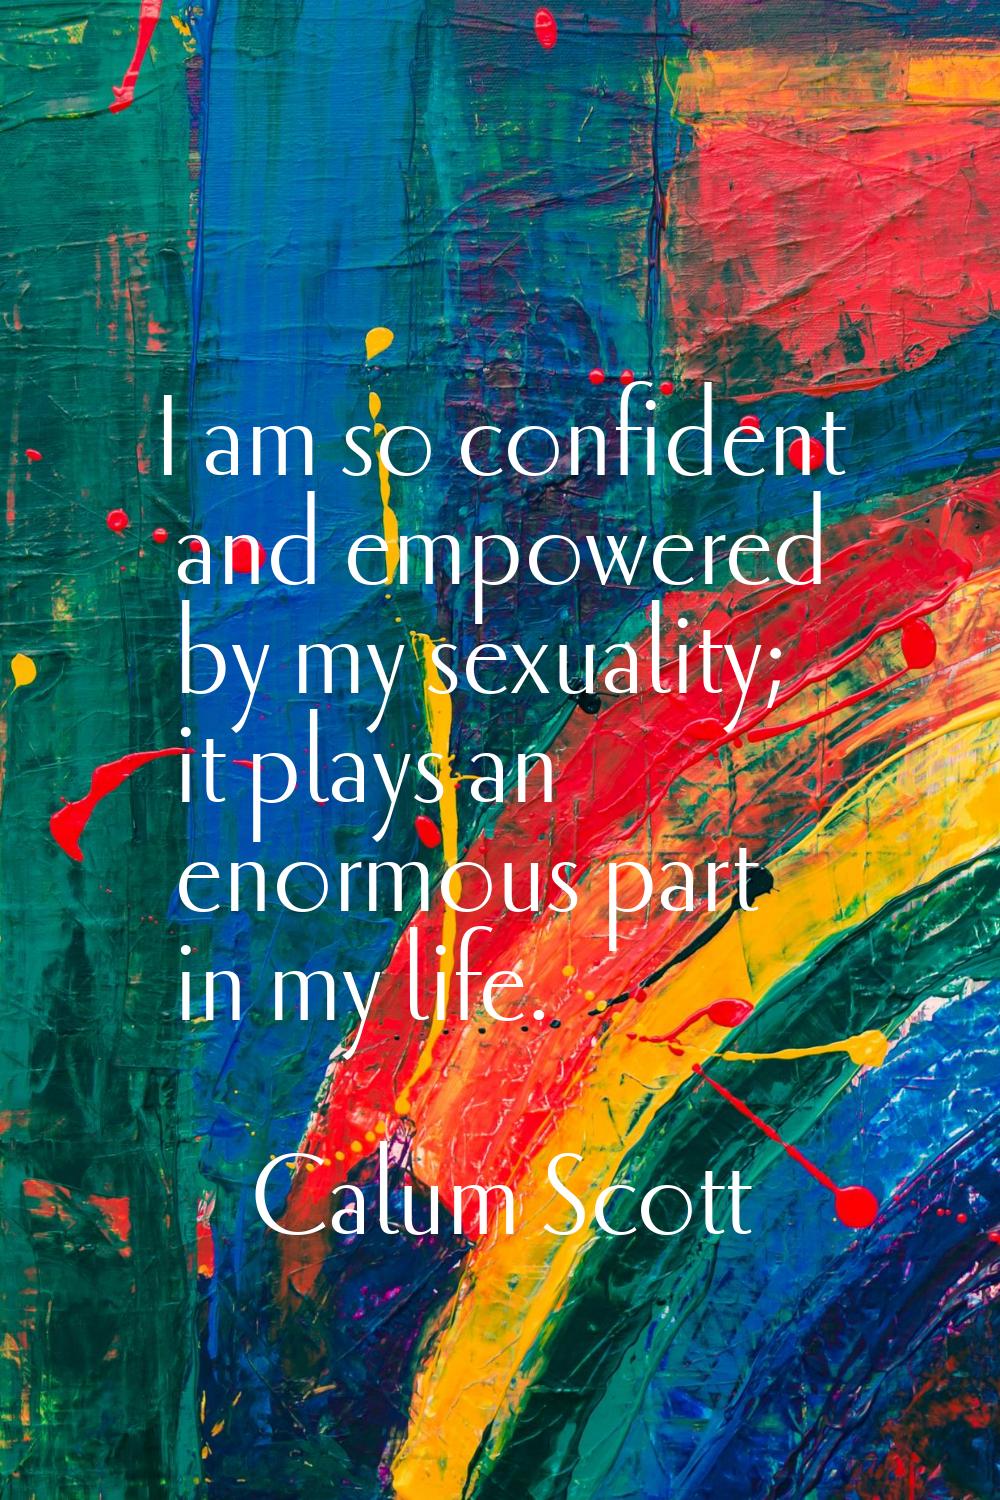 I am so confident and empowered by my sexuality; it plays an enormous part in my life.